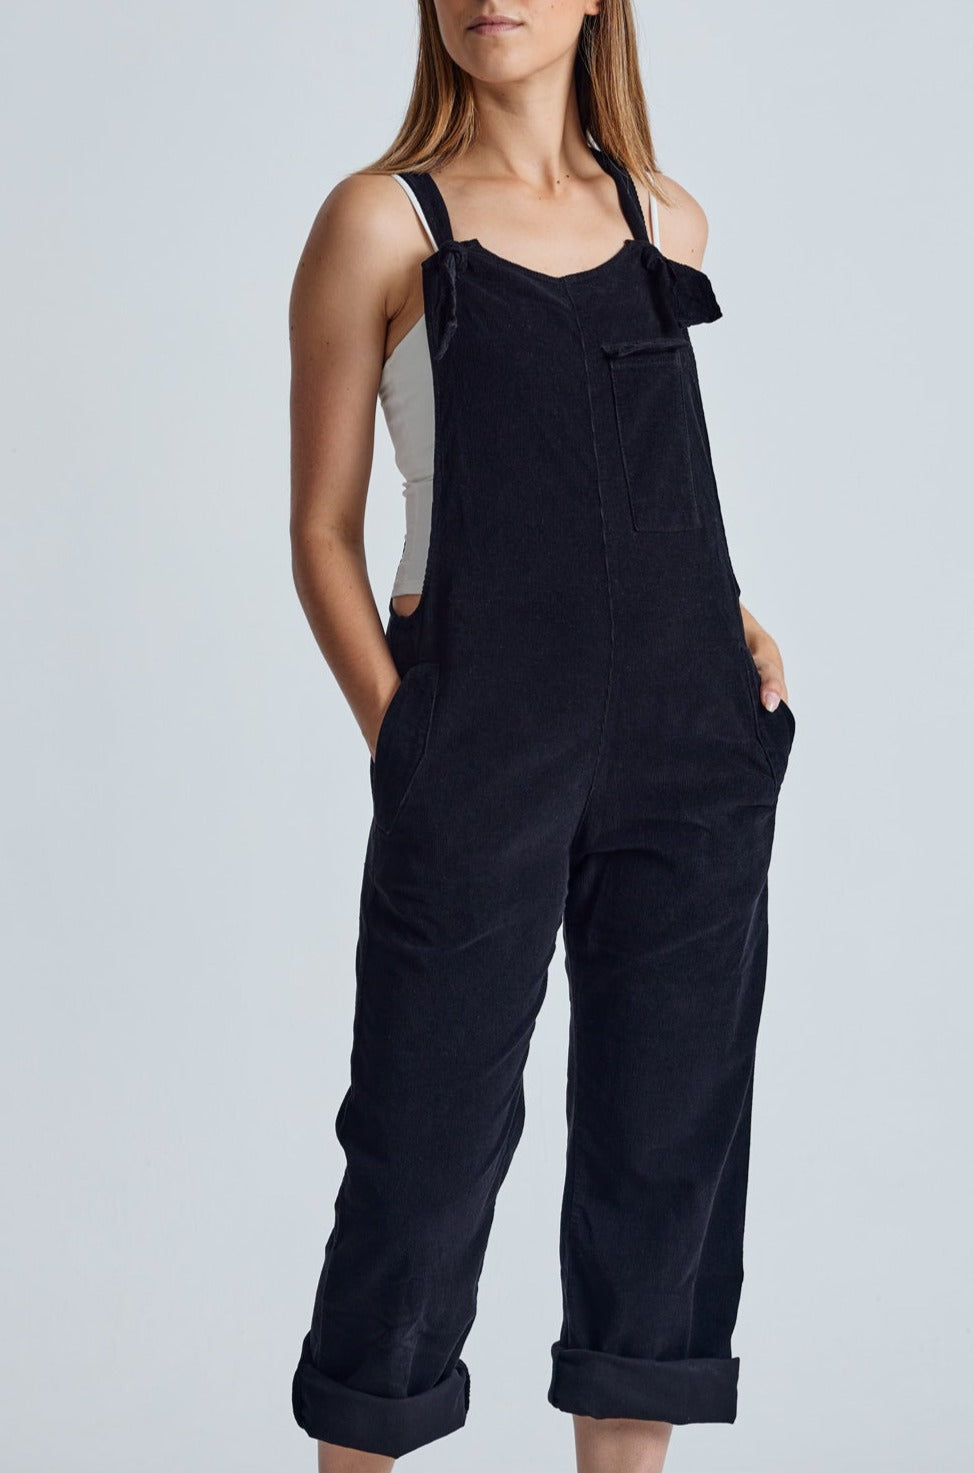 MARY-LOU Black - GOTS Organic Cotton Cord Dungarees by Flax & Loom, L